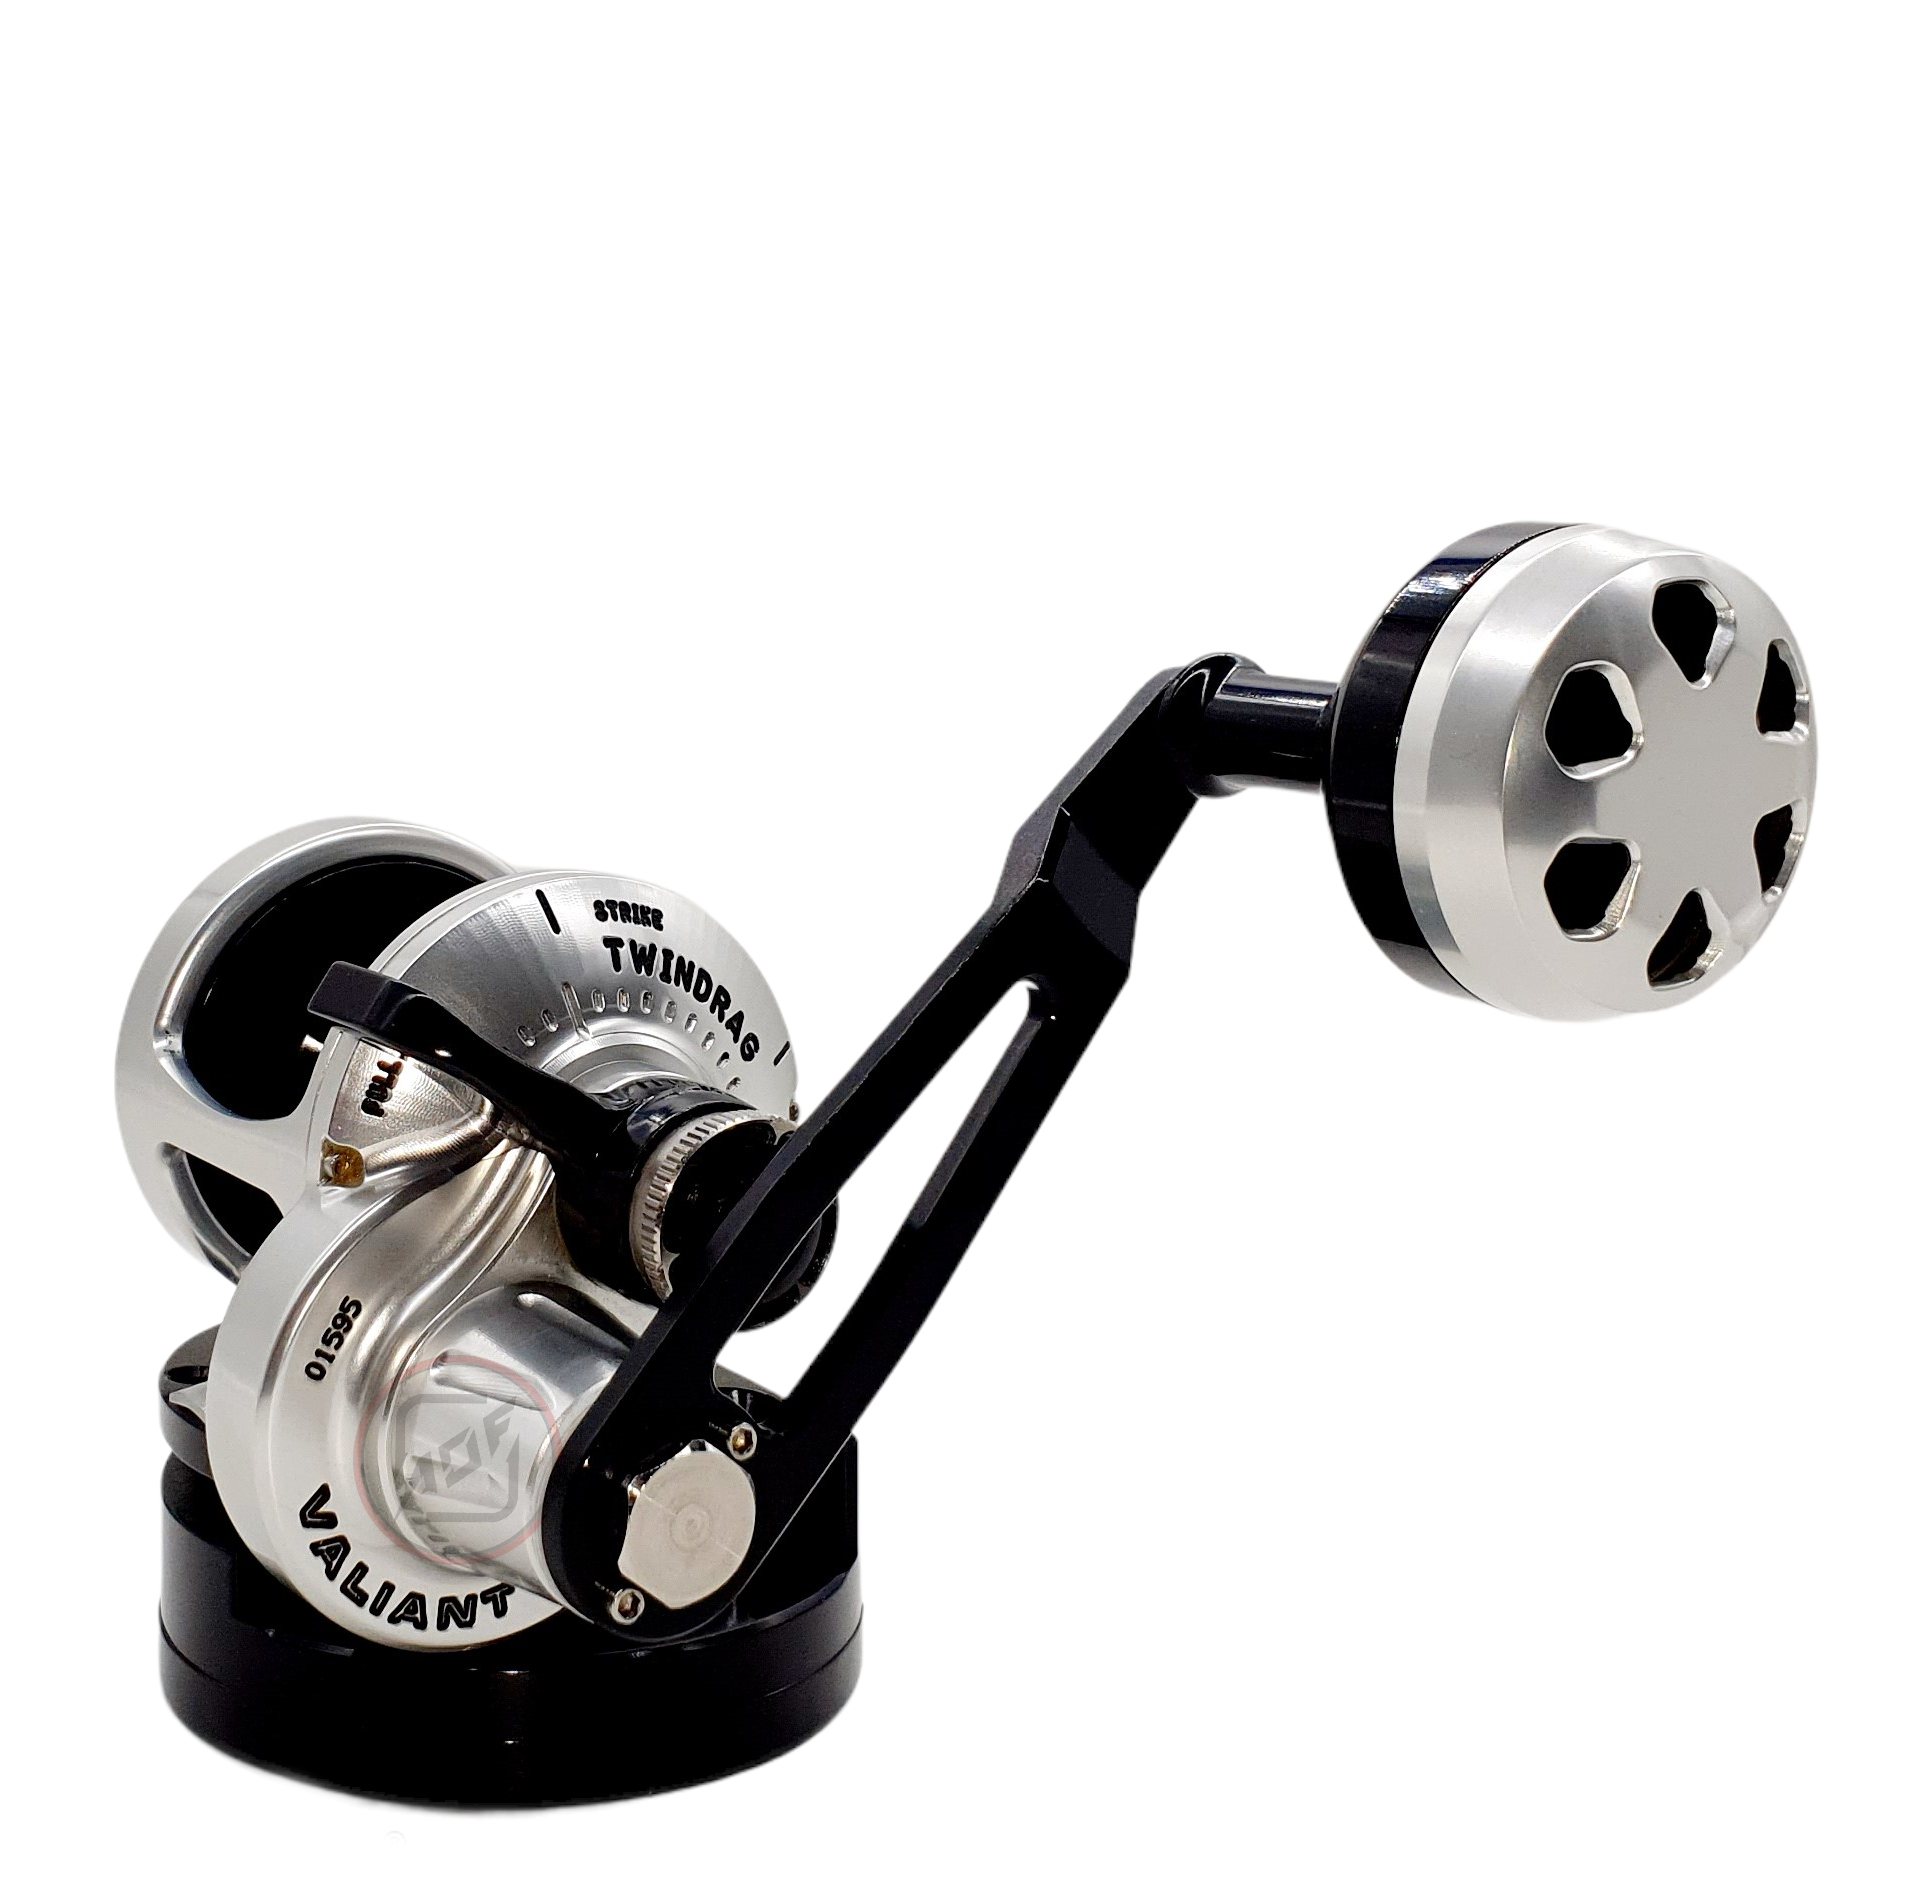 Accurate Valiant Fishing Reel – Accurate Fishing